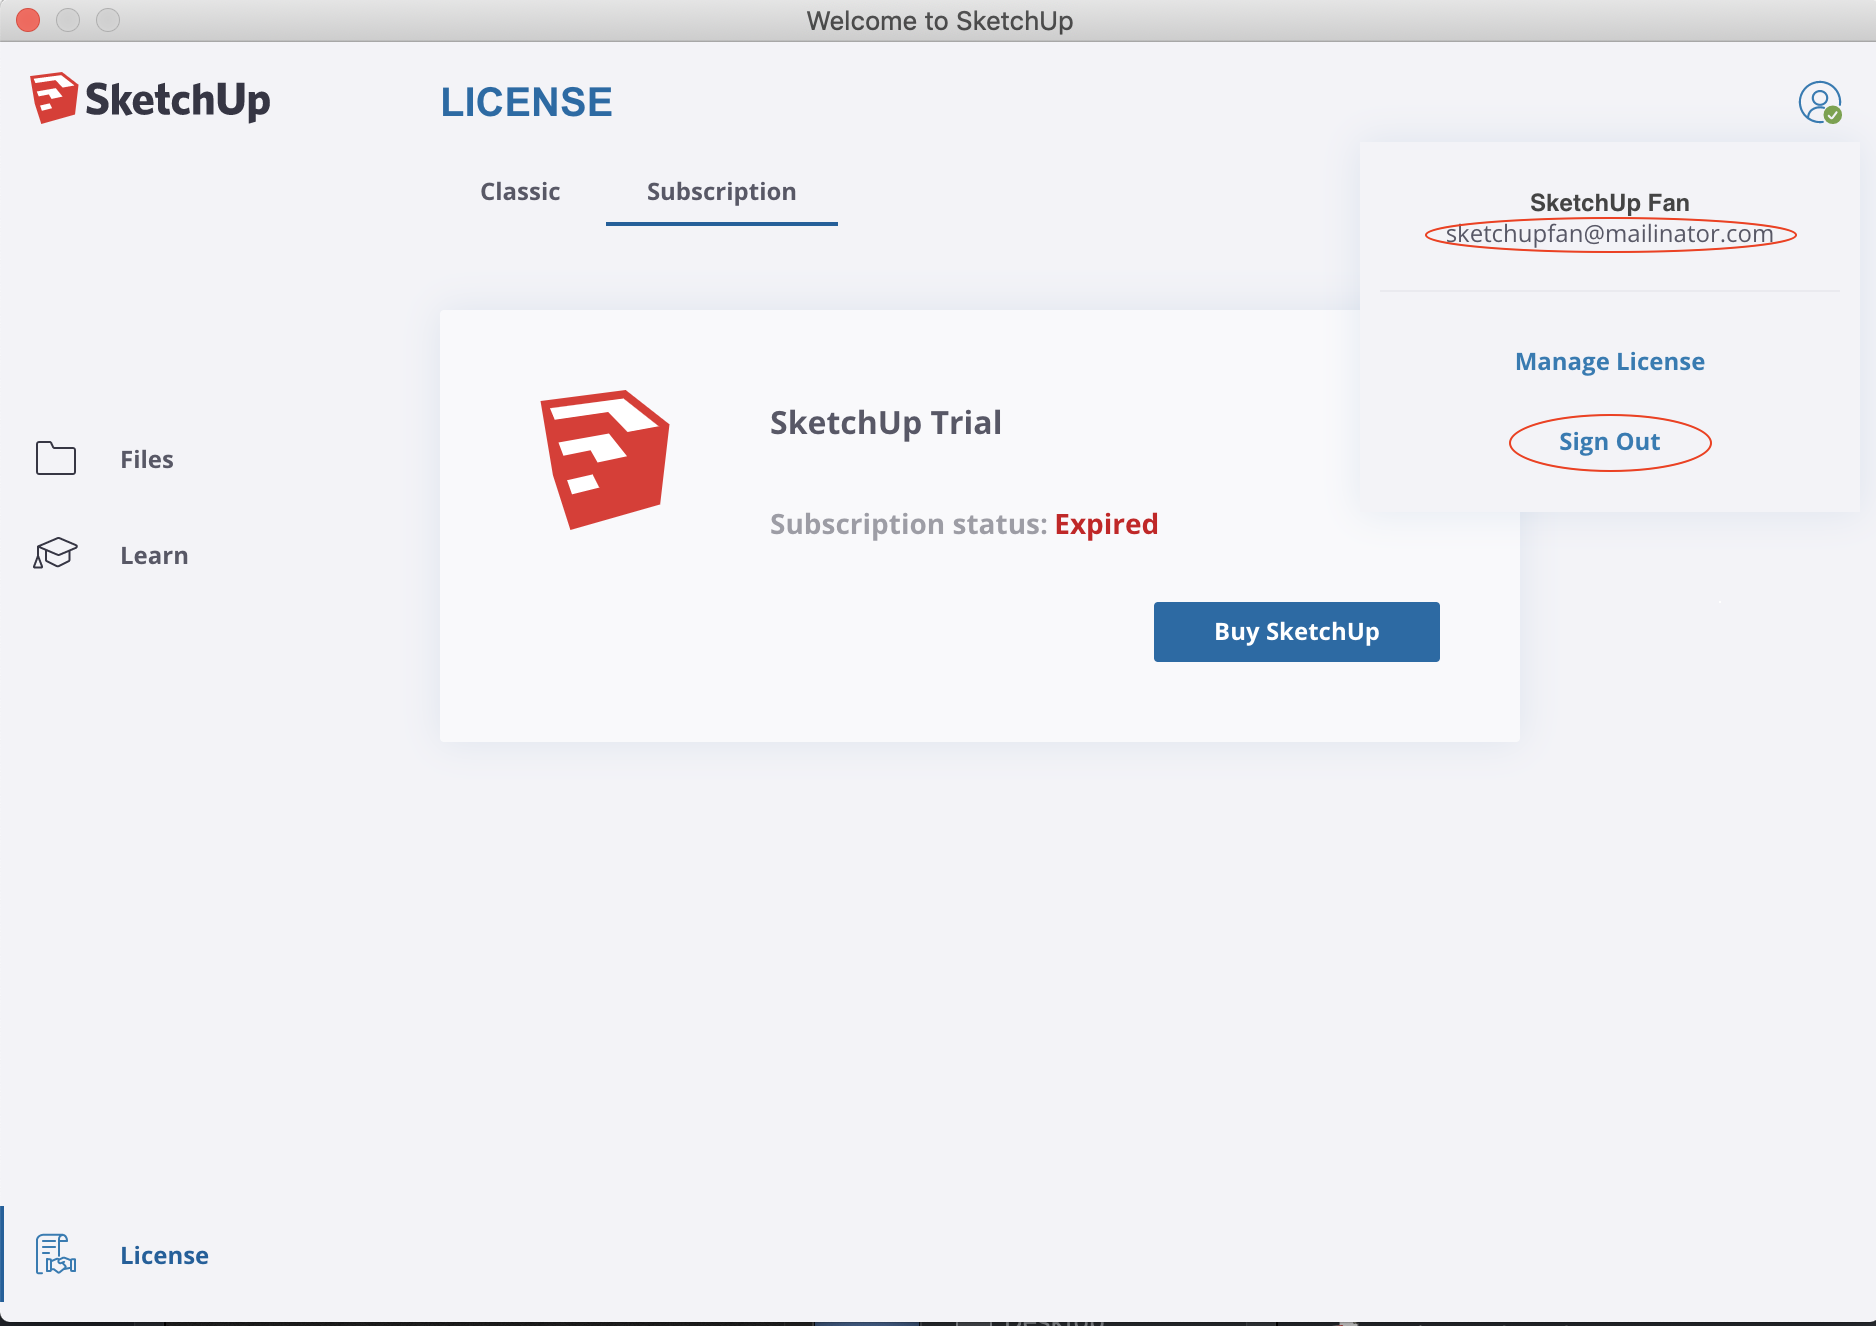 sketchup pro 2019 license key and authorization number